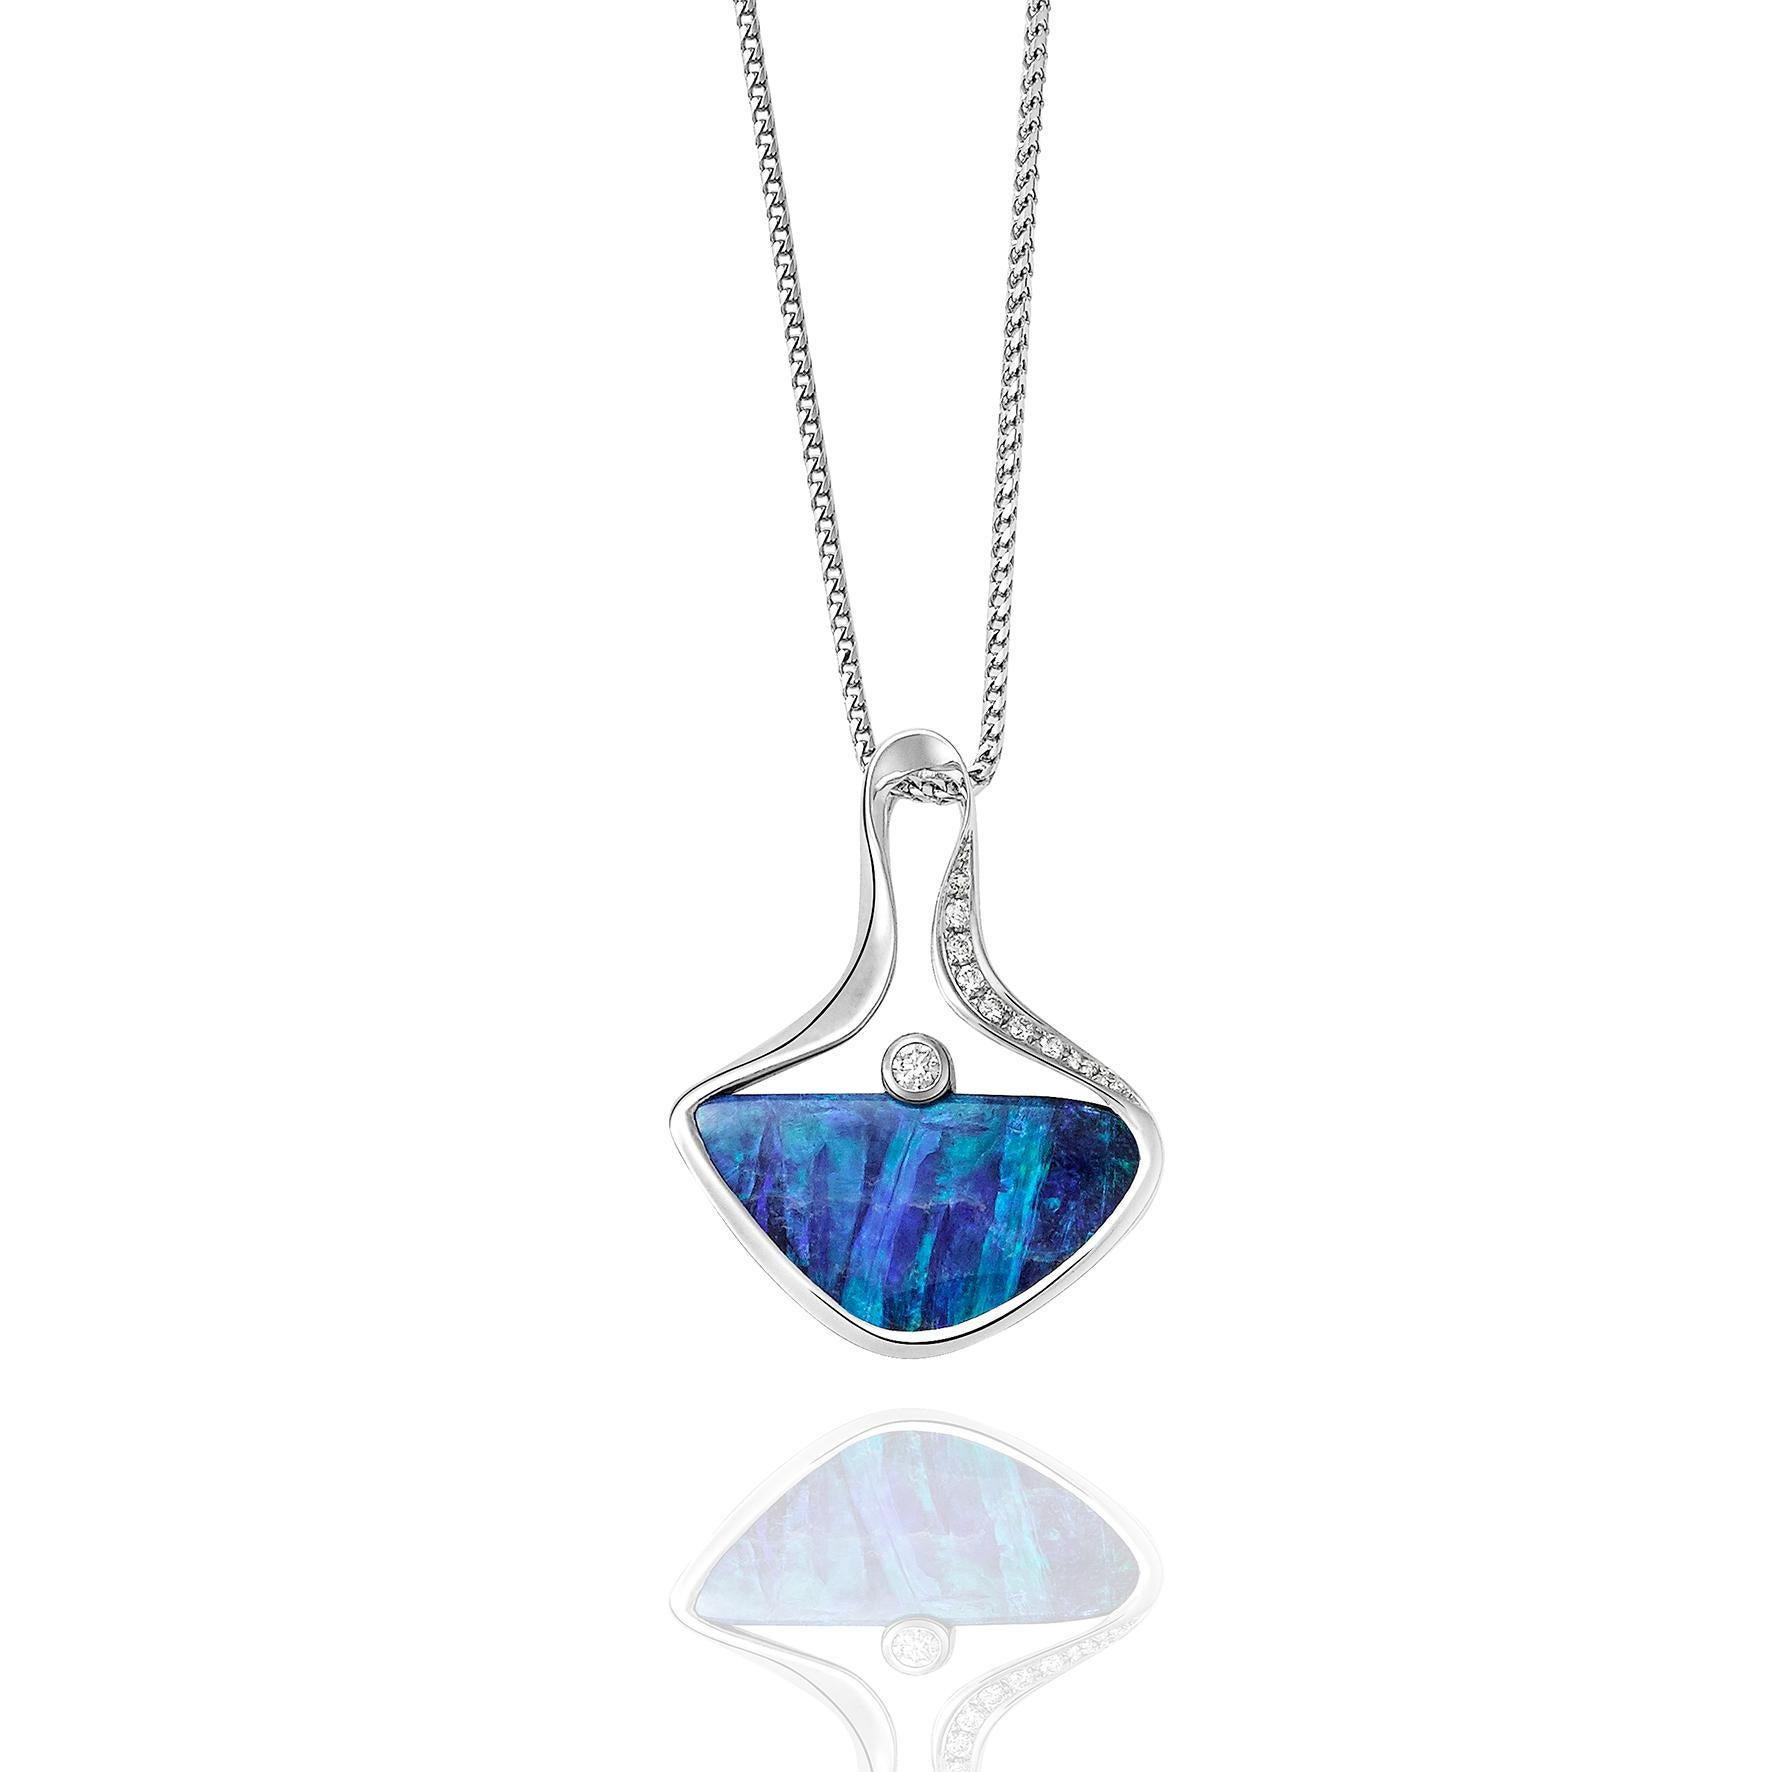 Giulians contemporary Australian boulder opal pendant necklace. This contemporary pendant features a 7.50ct natural solid opal from Queensland, with bright blue play-of-colour. The opal is semi bezel set in 18ct white gold, and is accented by a